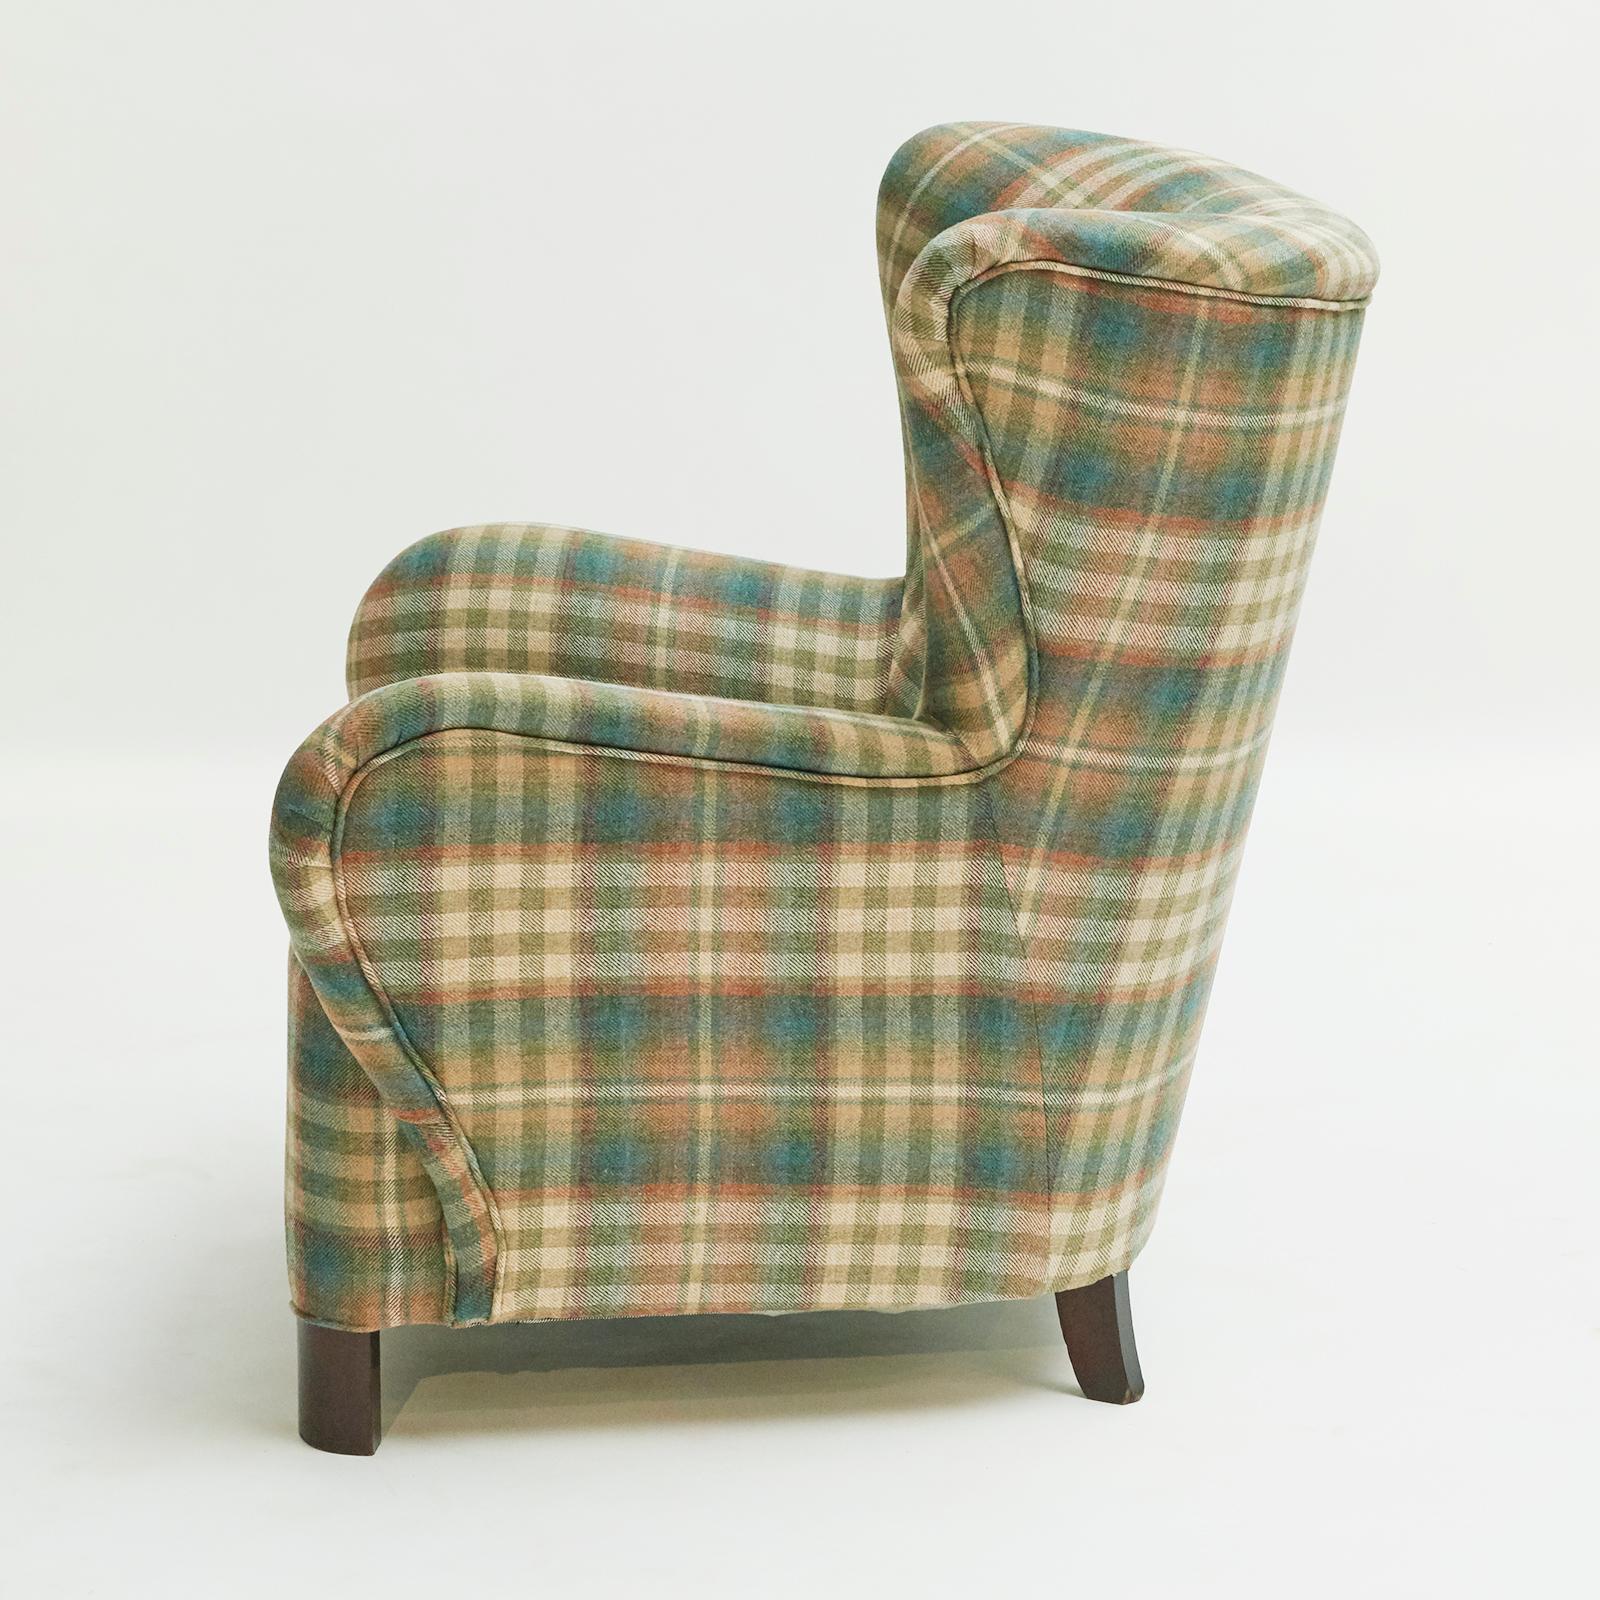 Mid-20th Century Easy Chair, Danish, Reupholstered with Mulberry Fabric